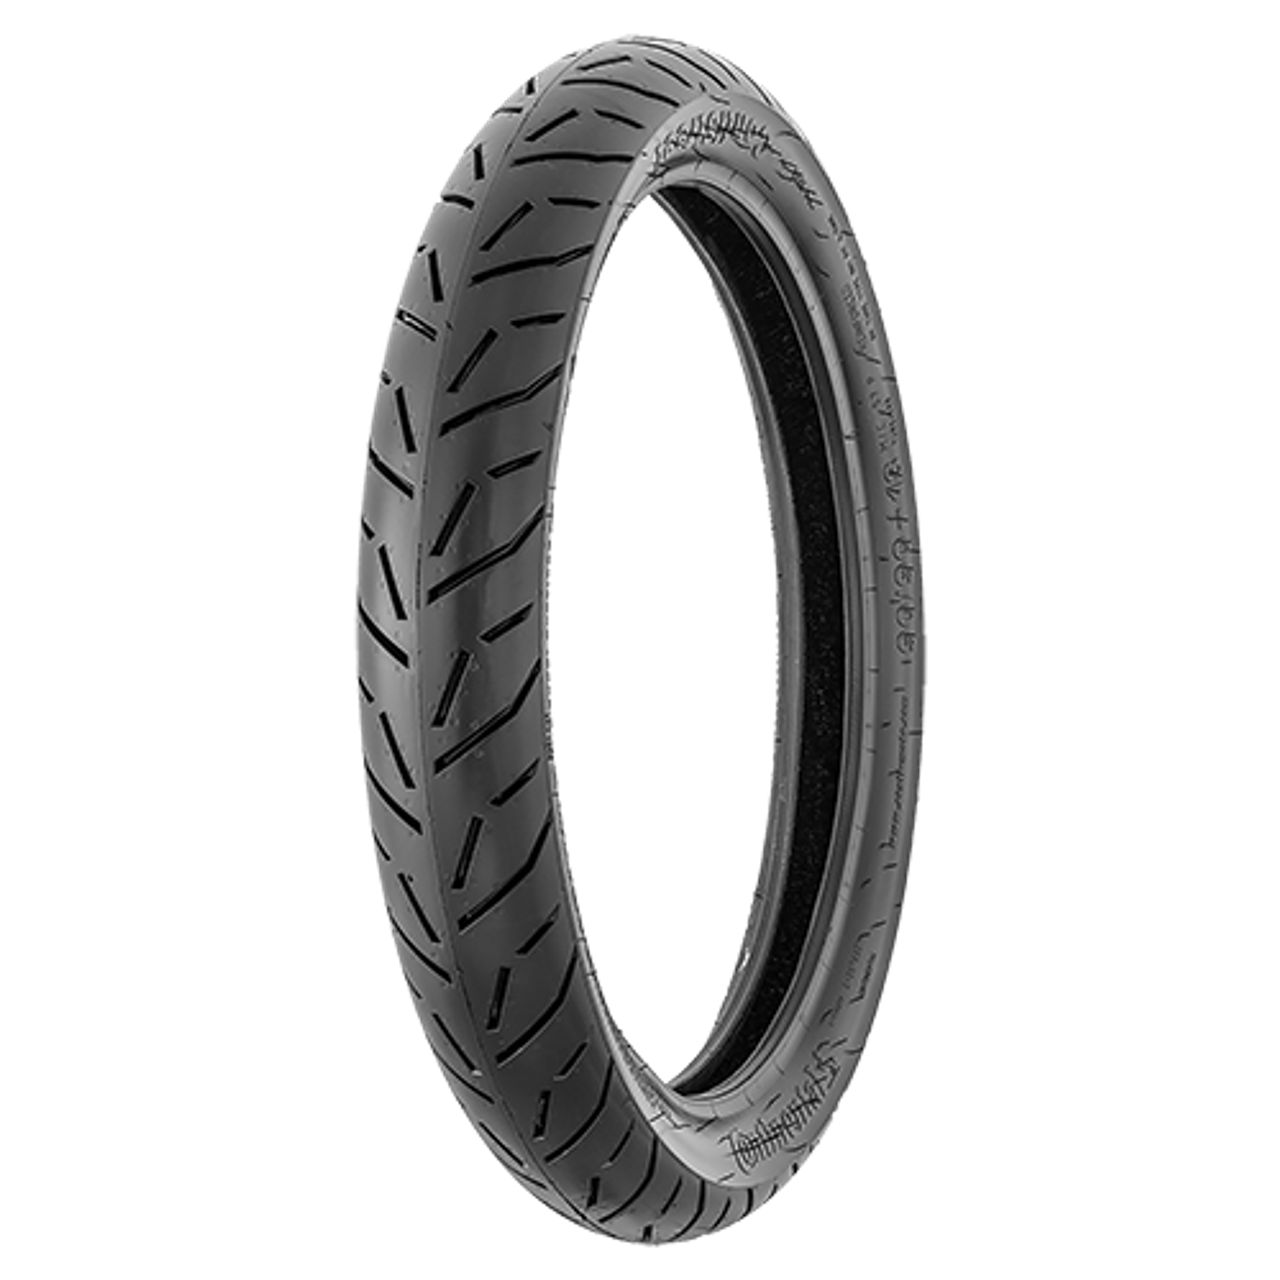 CONTINENTAL CONTISTREET 70/90 - 17 M/C TL 38P BSW FRONT